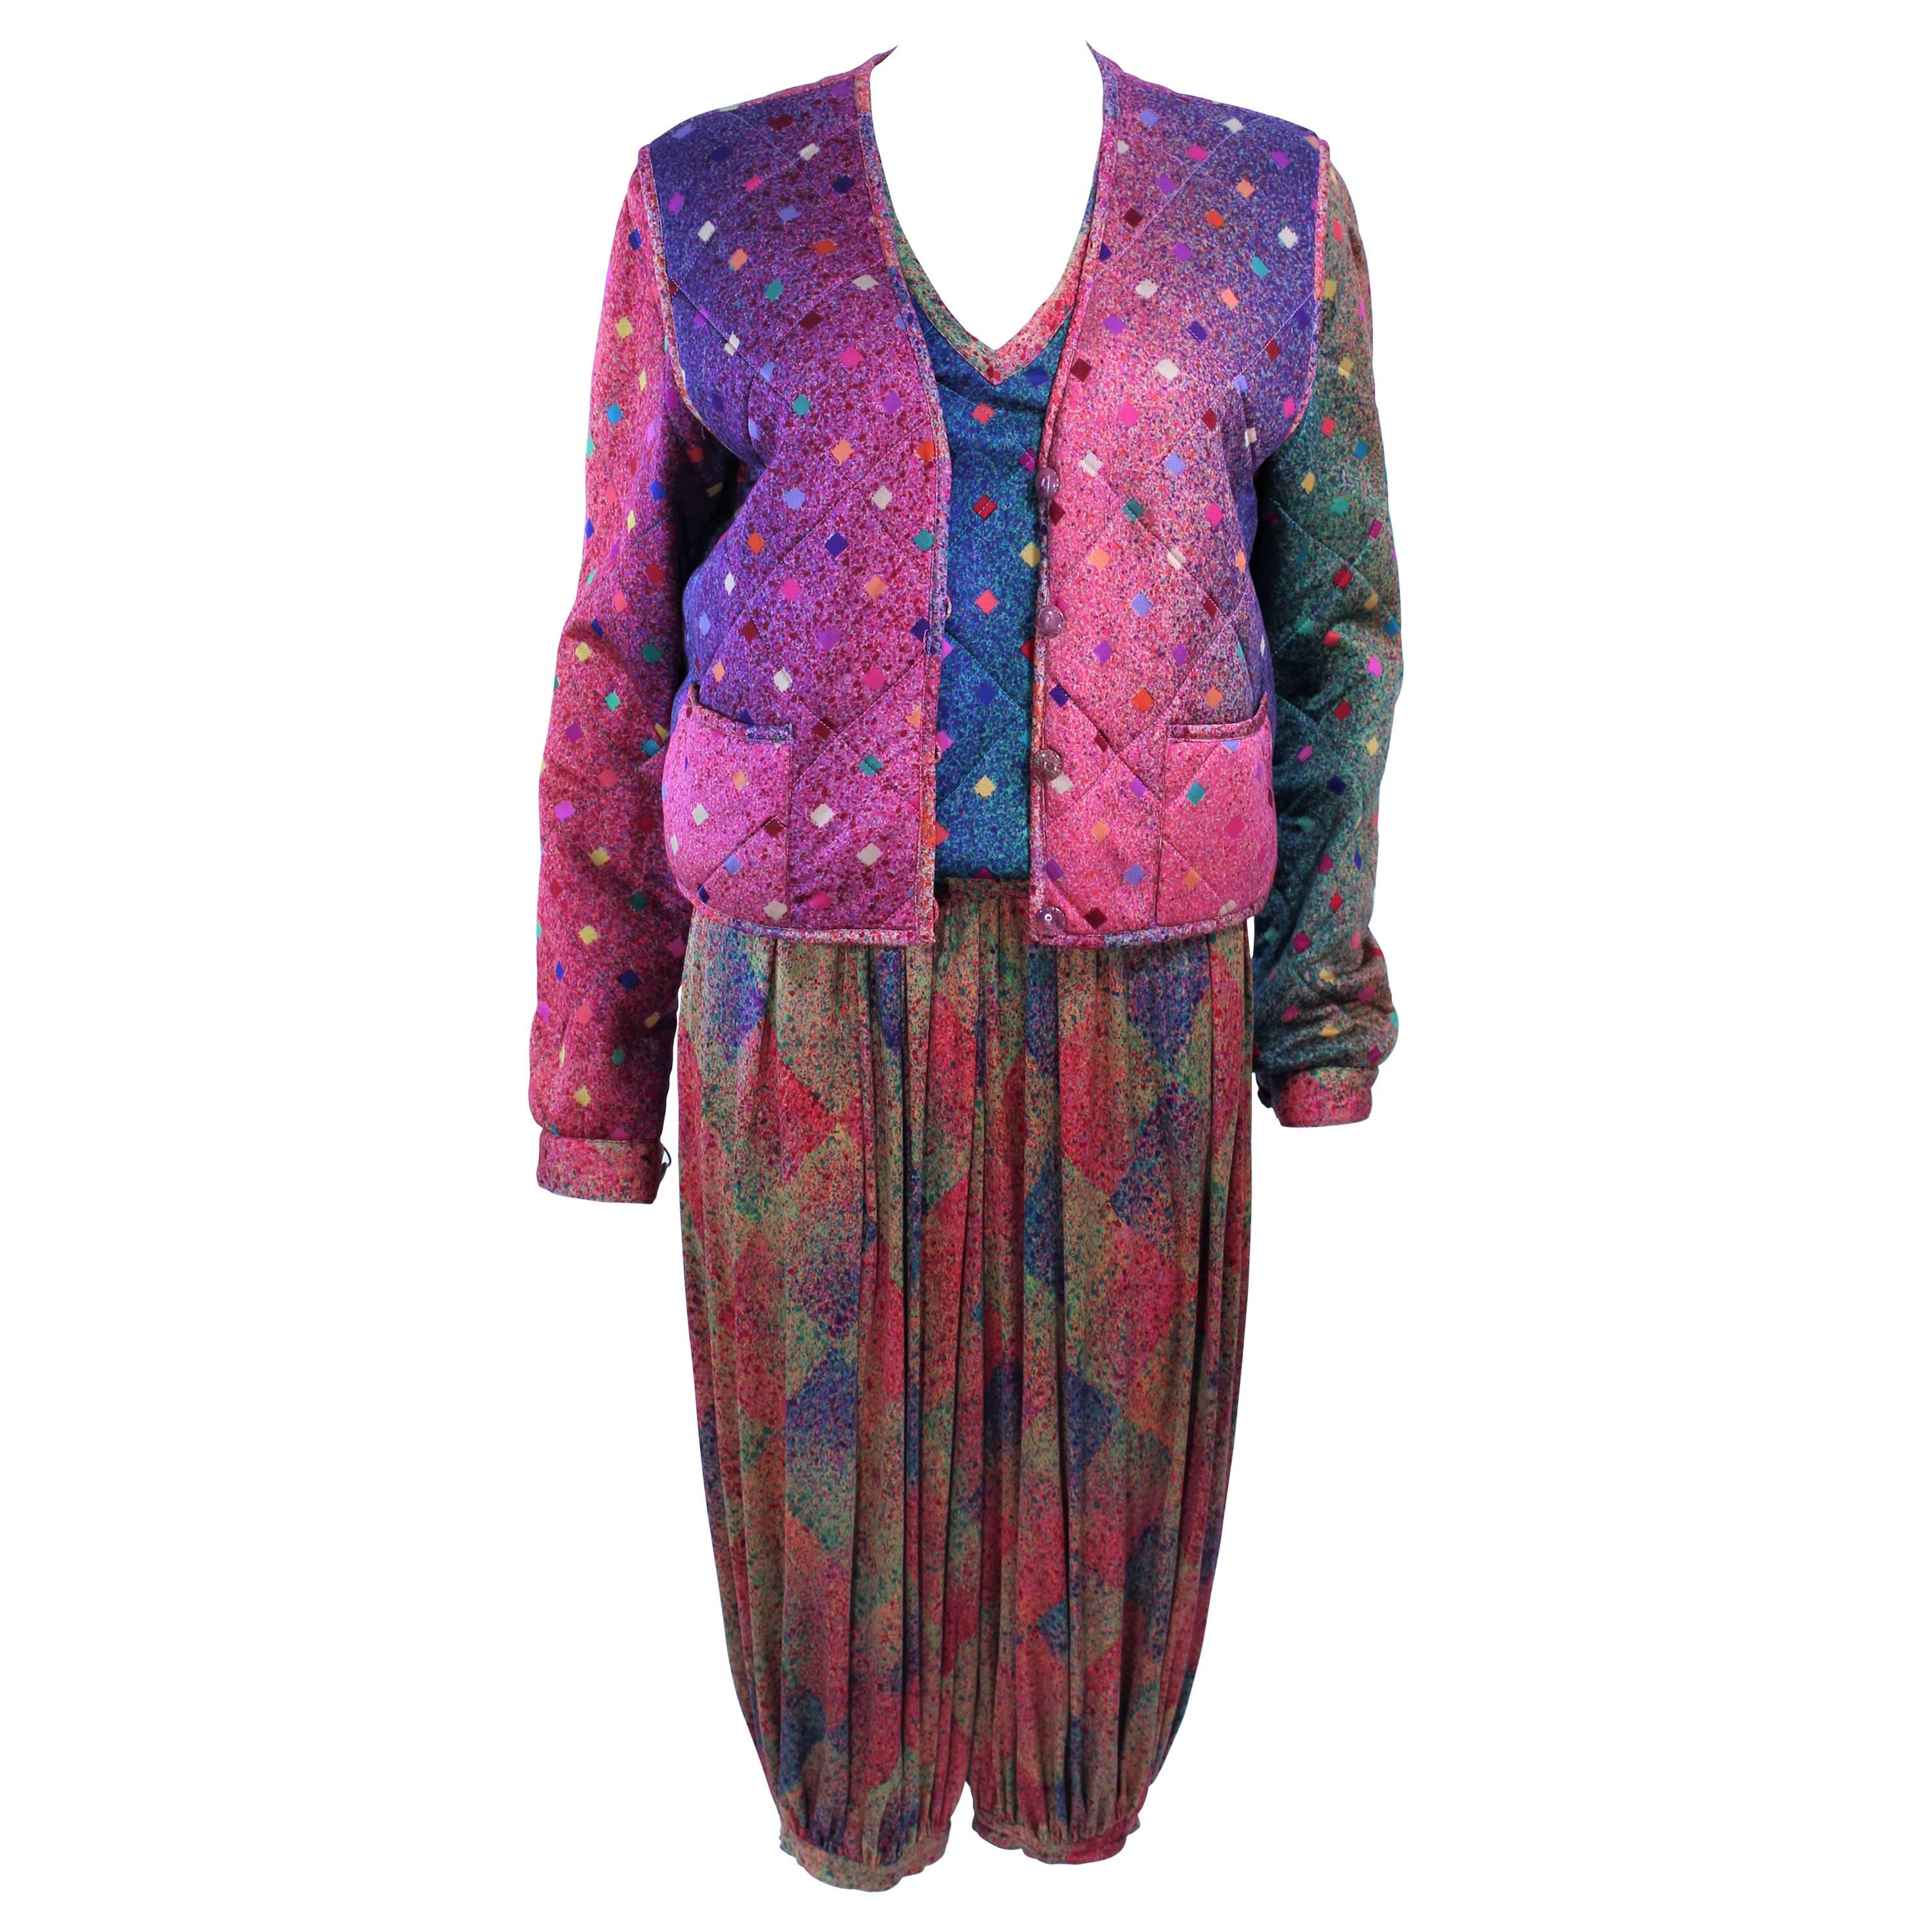 MISSONI Silk Rainbow Print Ensemble with Harem Pants Quilted Sweater Size 6 8